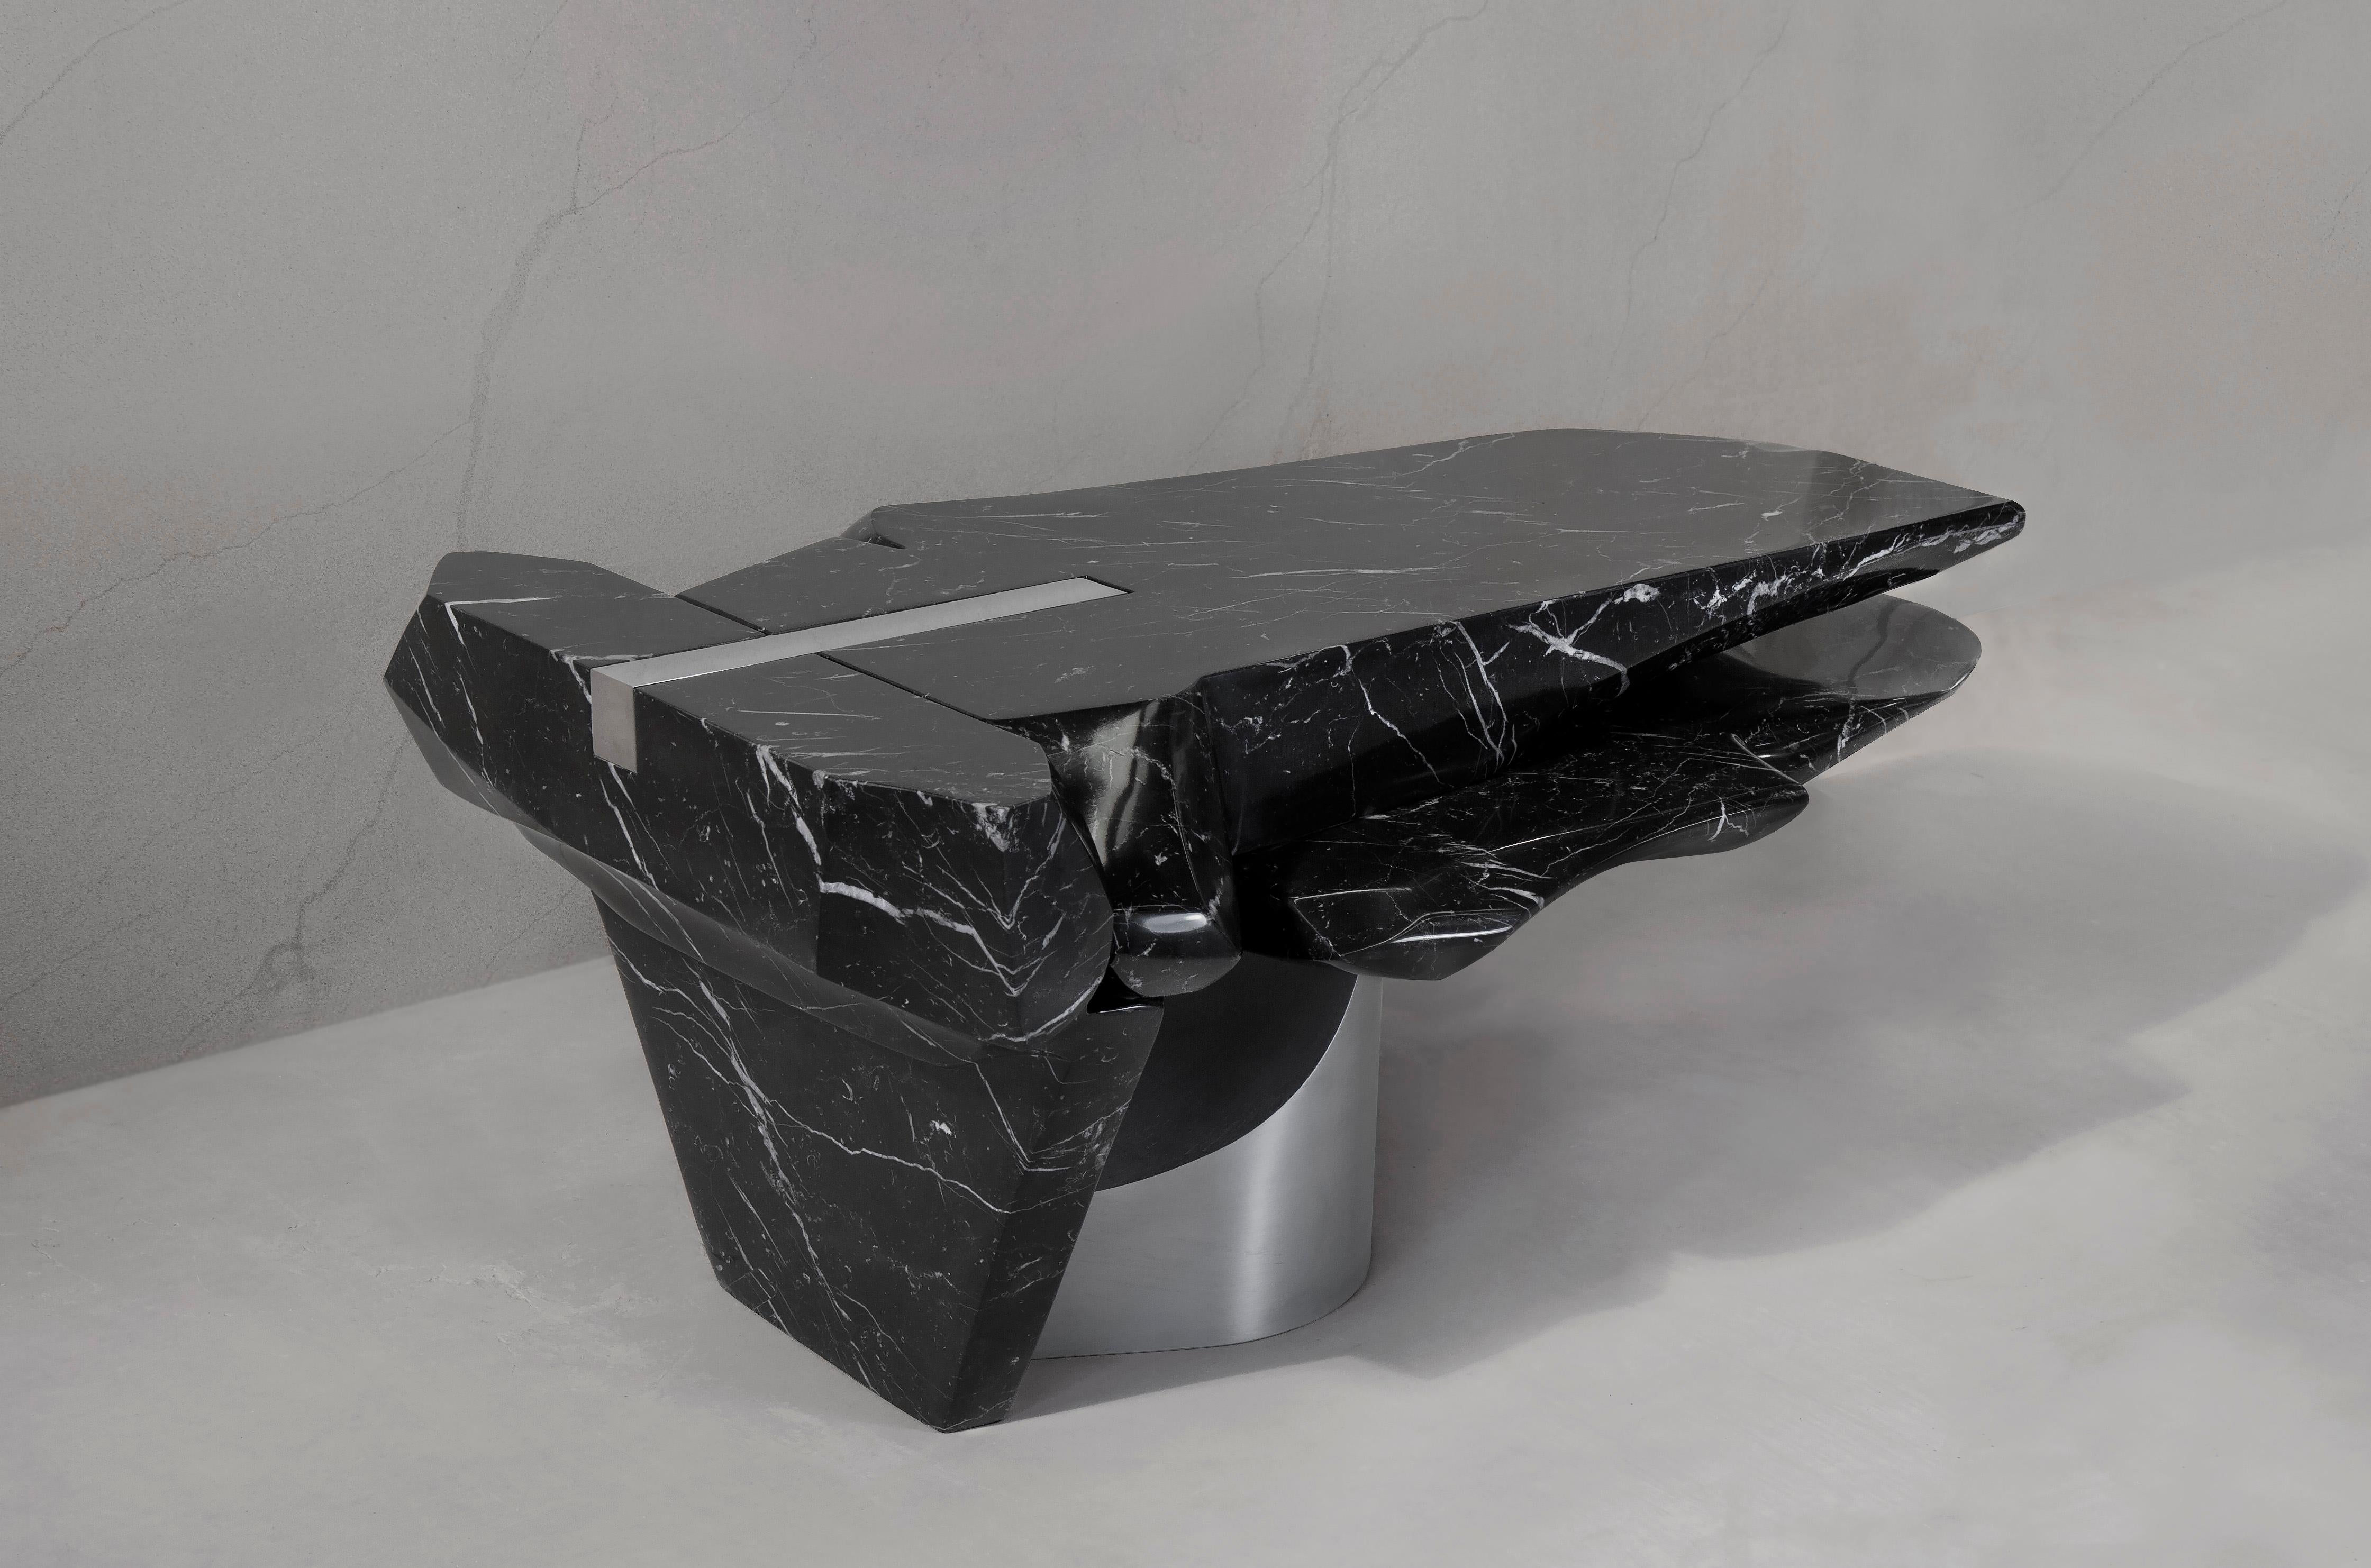 Spanish Coffee Table by Todomuta Studio Black Marble Aluminum Stainless Steel For Sale